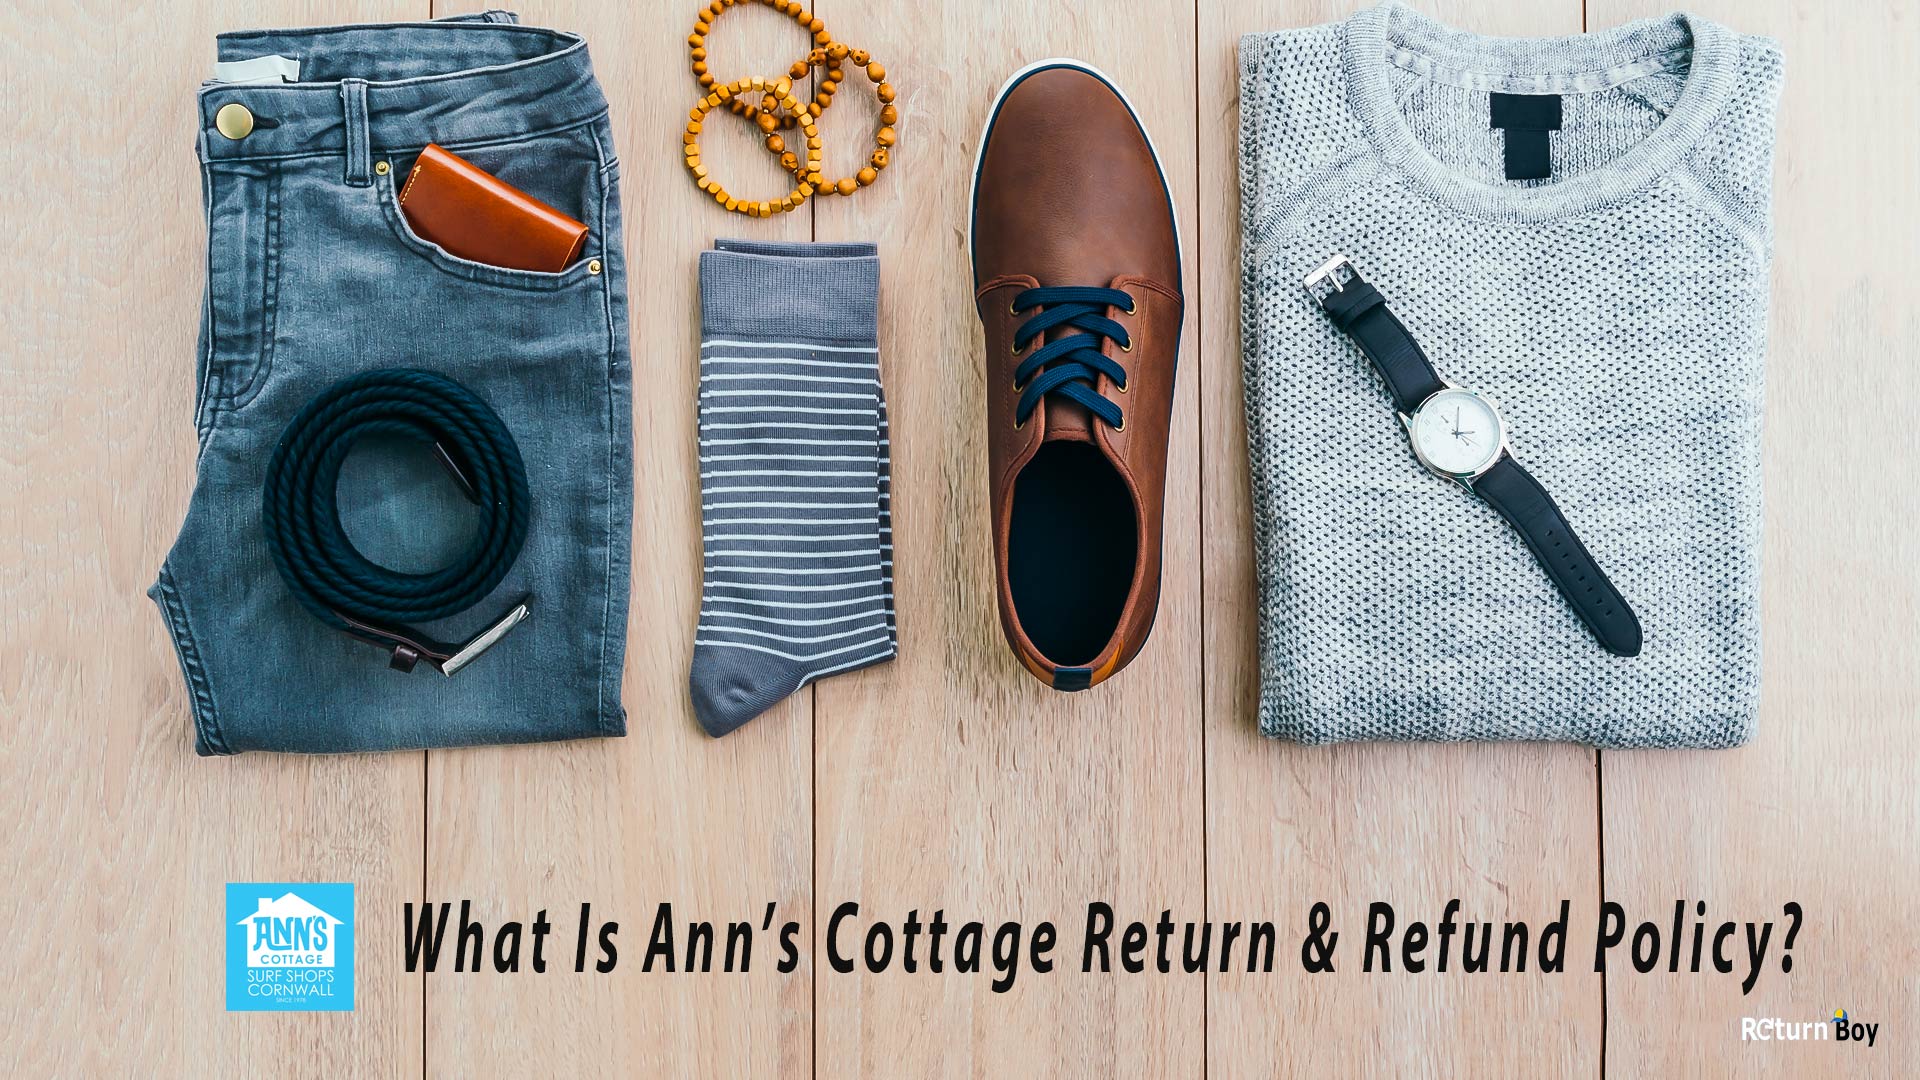 Ann’s Cottage Returns Policy